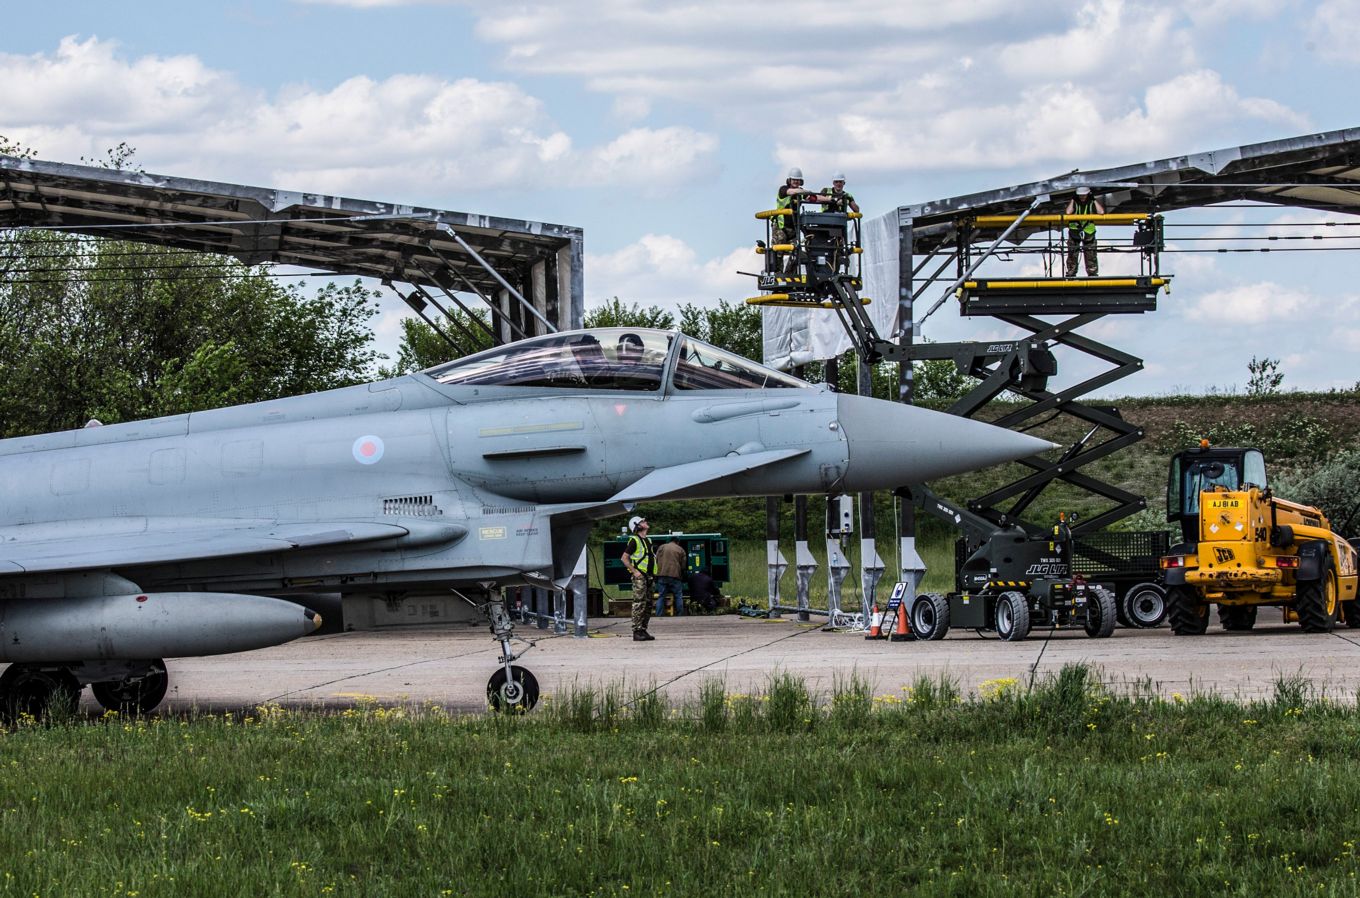 5001 Sqn at work during a NATO Air Policing Mission in Romania in 2018